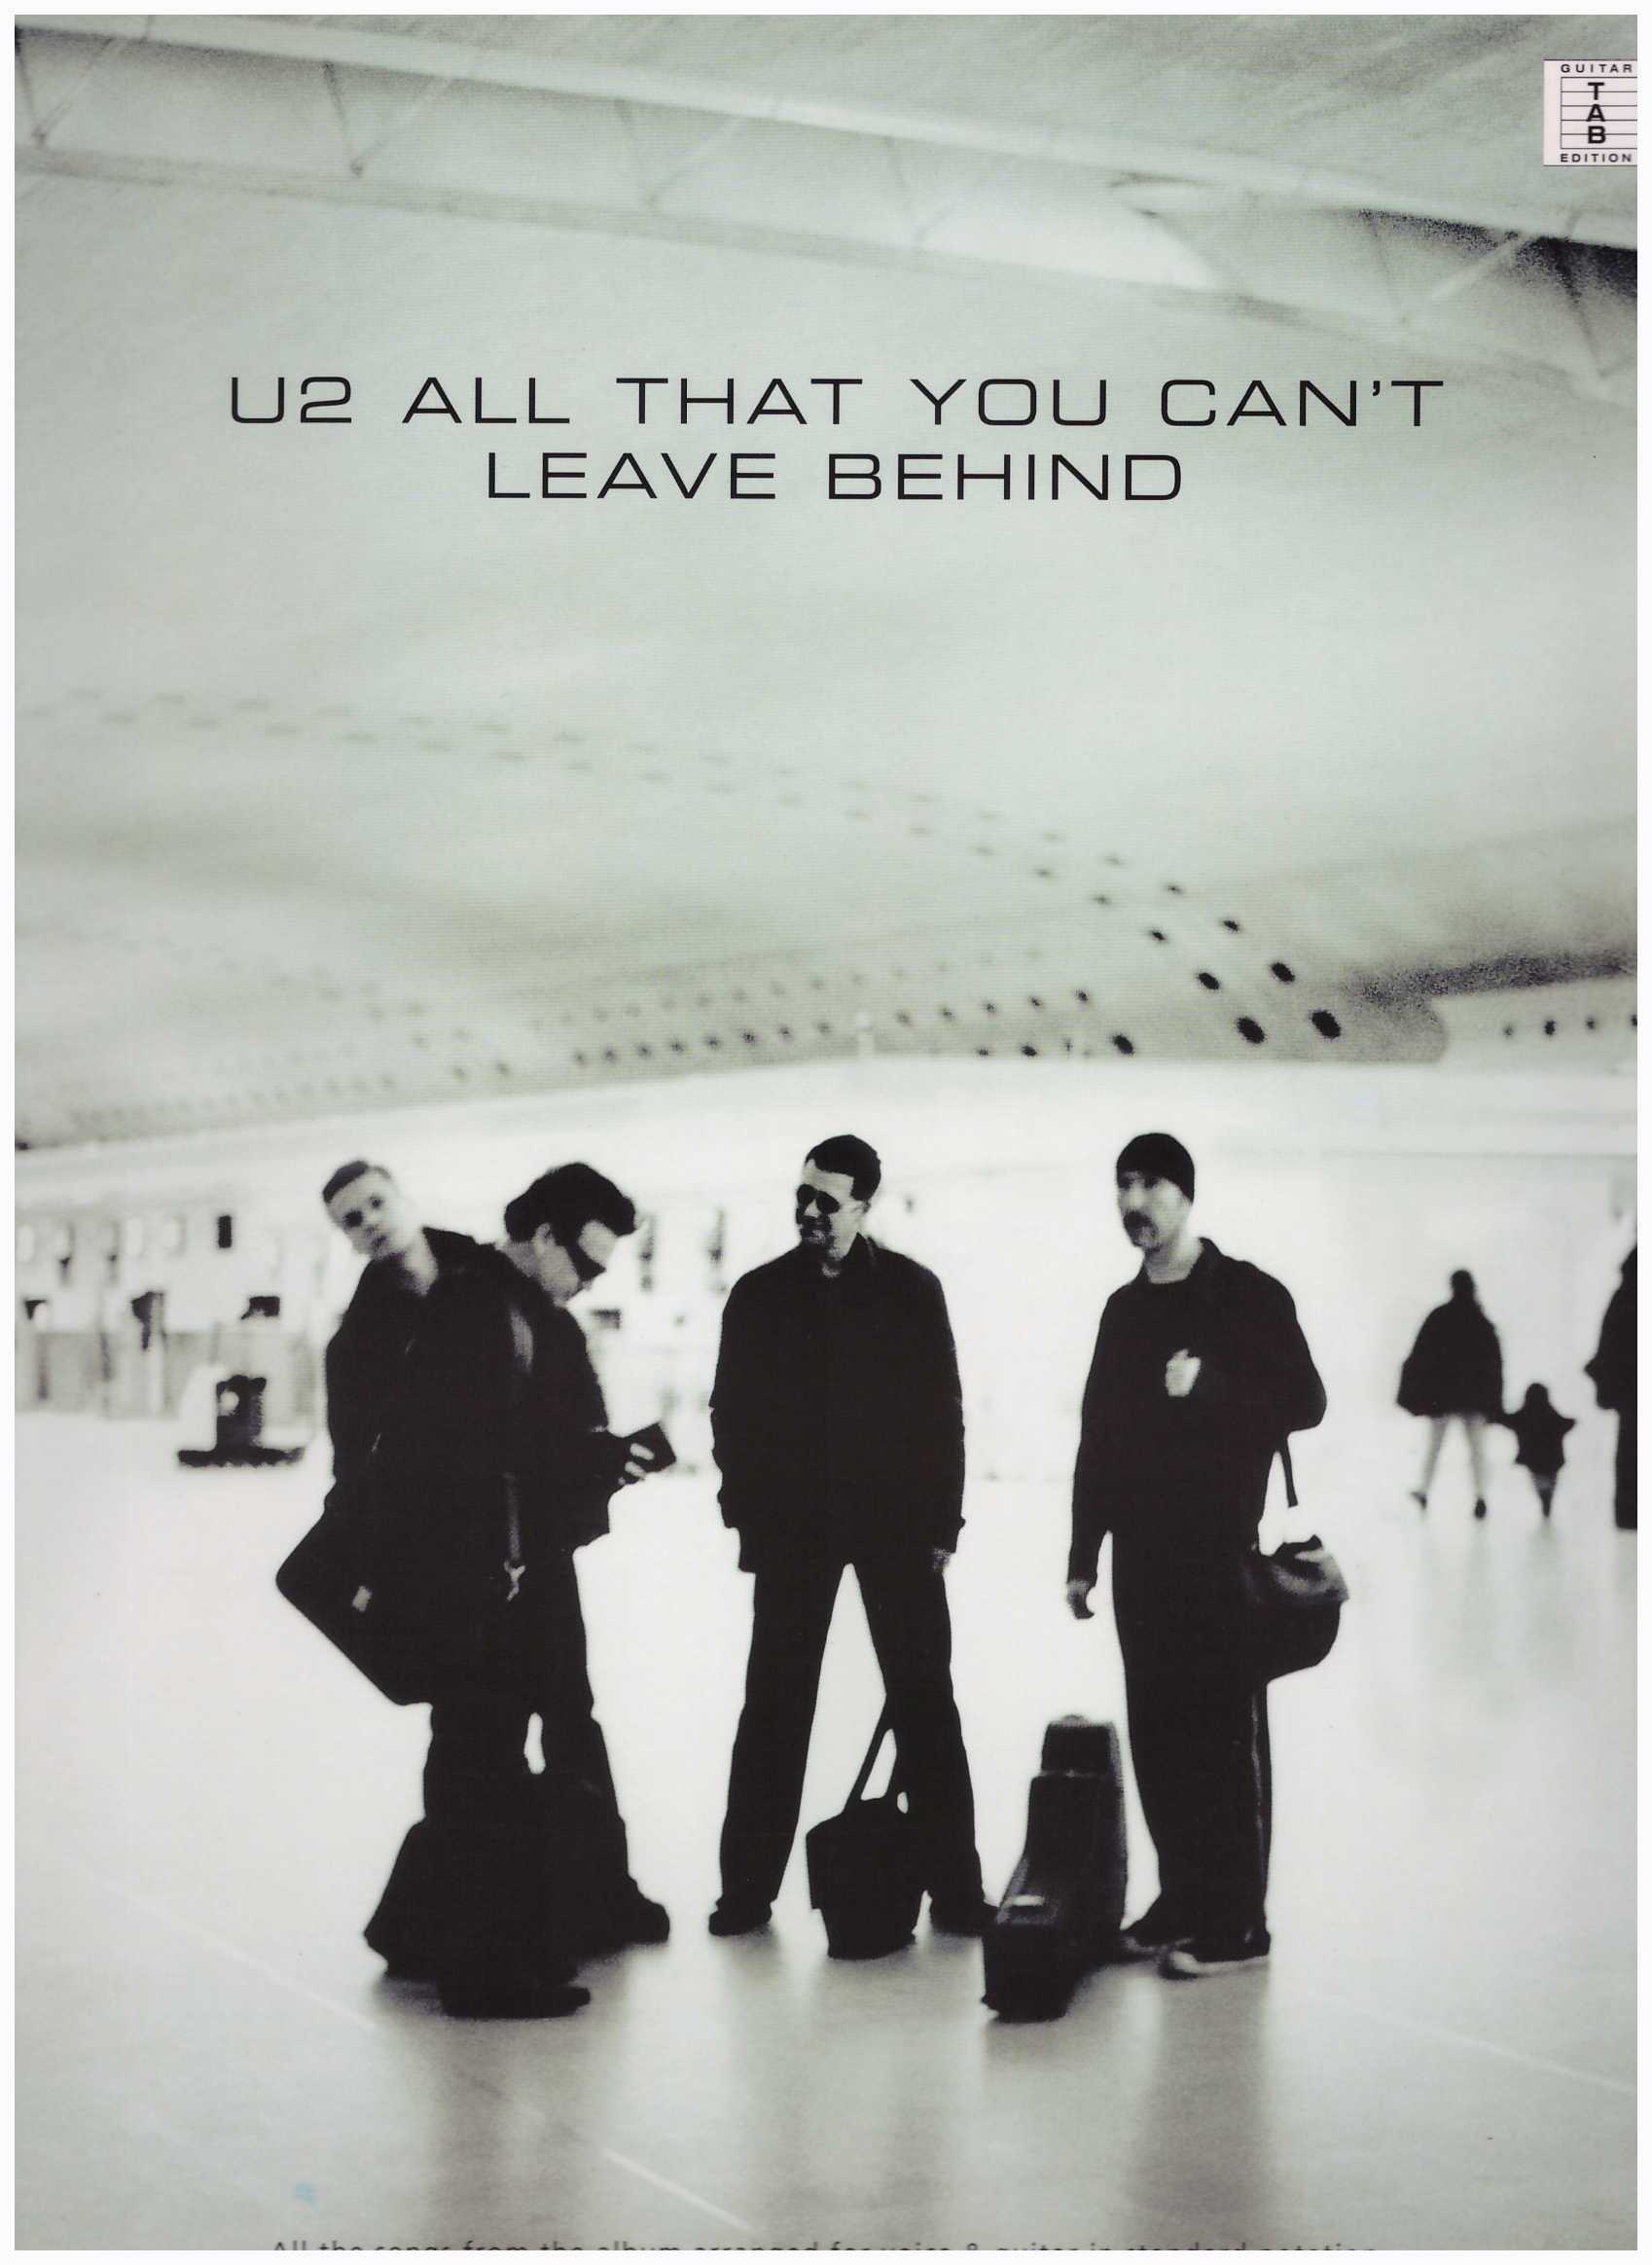 U2 All That You Can't Leave Behind / Pop Song Book / Vocal Book / Voice Book / Guitar Book / Gitar Book / Tab Book